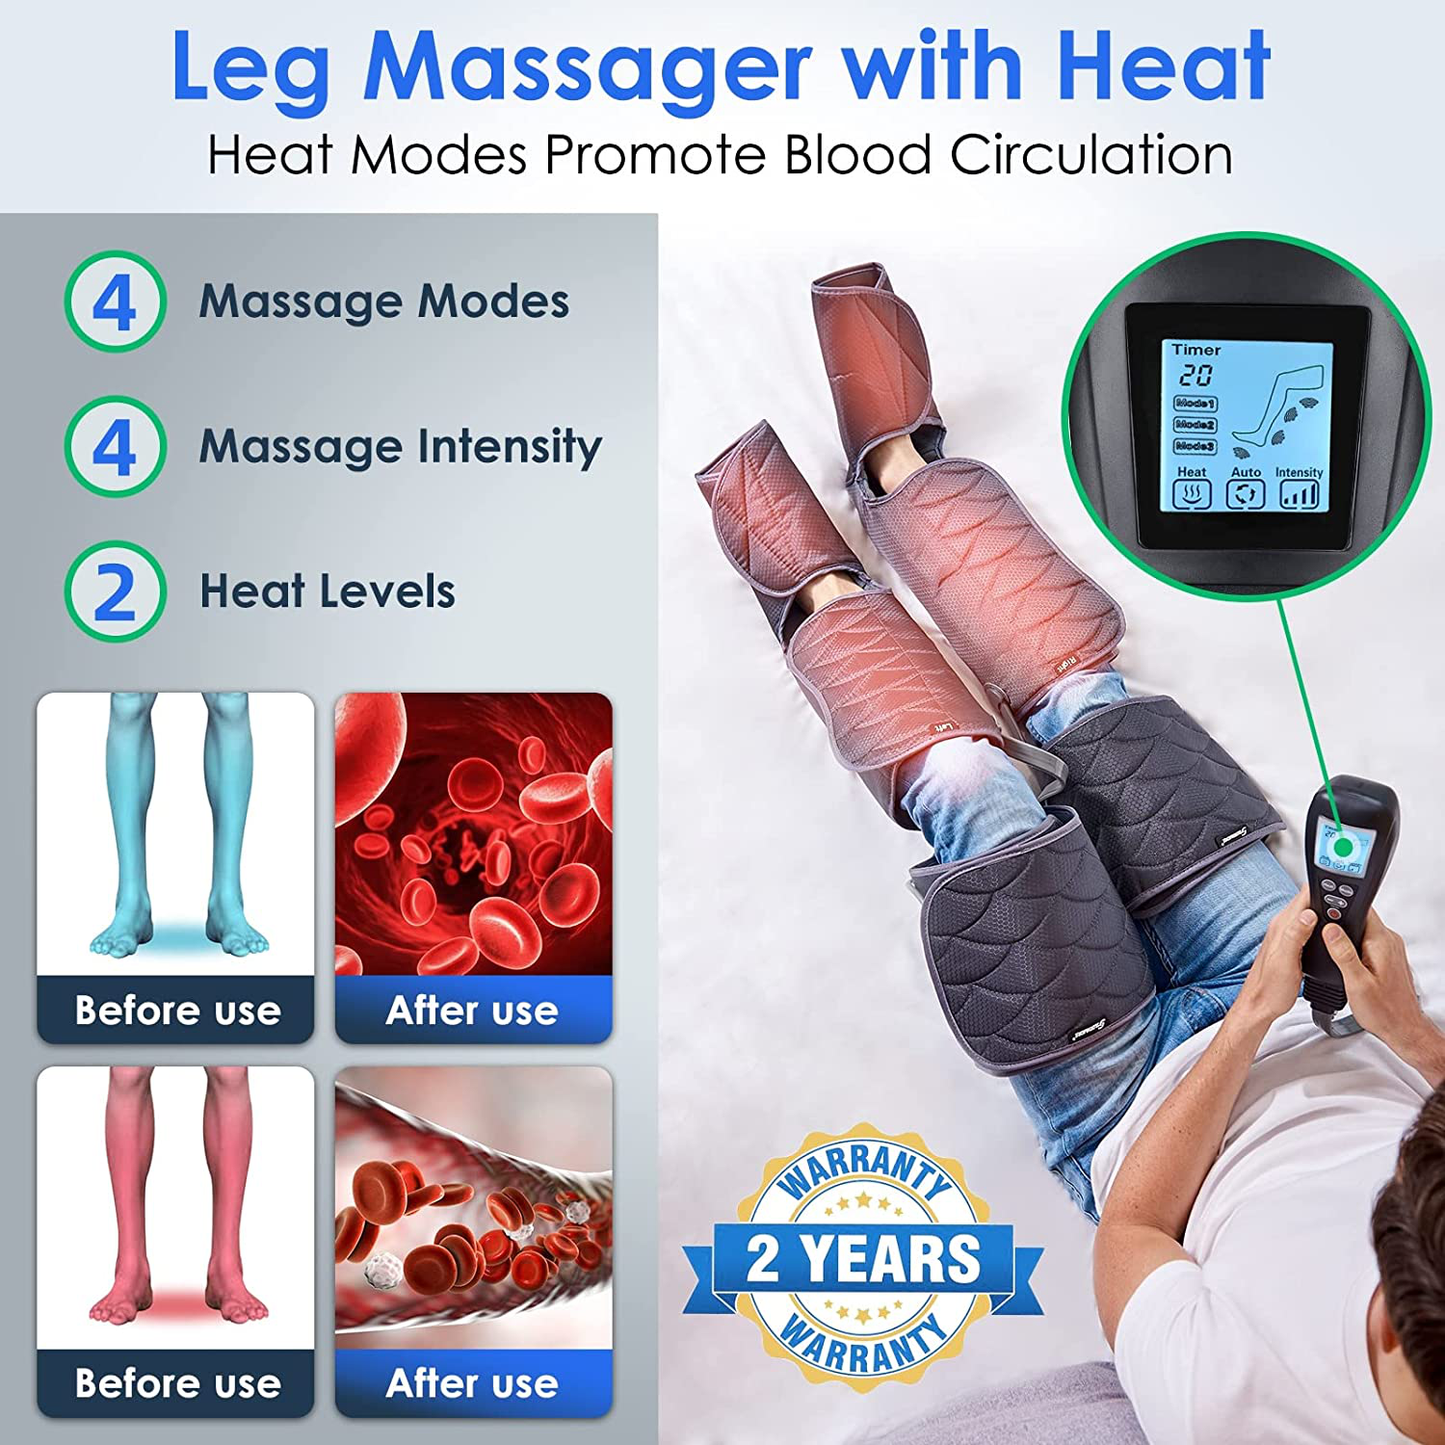 Leg Massager for Circulation & Relaxation, Air Compression Calf Feet Thigh Massage, Muscle Pain Relief, Adjustable Wraps for Most Size with 4 Modes 4 Intensities 2 Heat